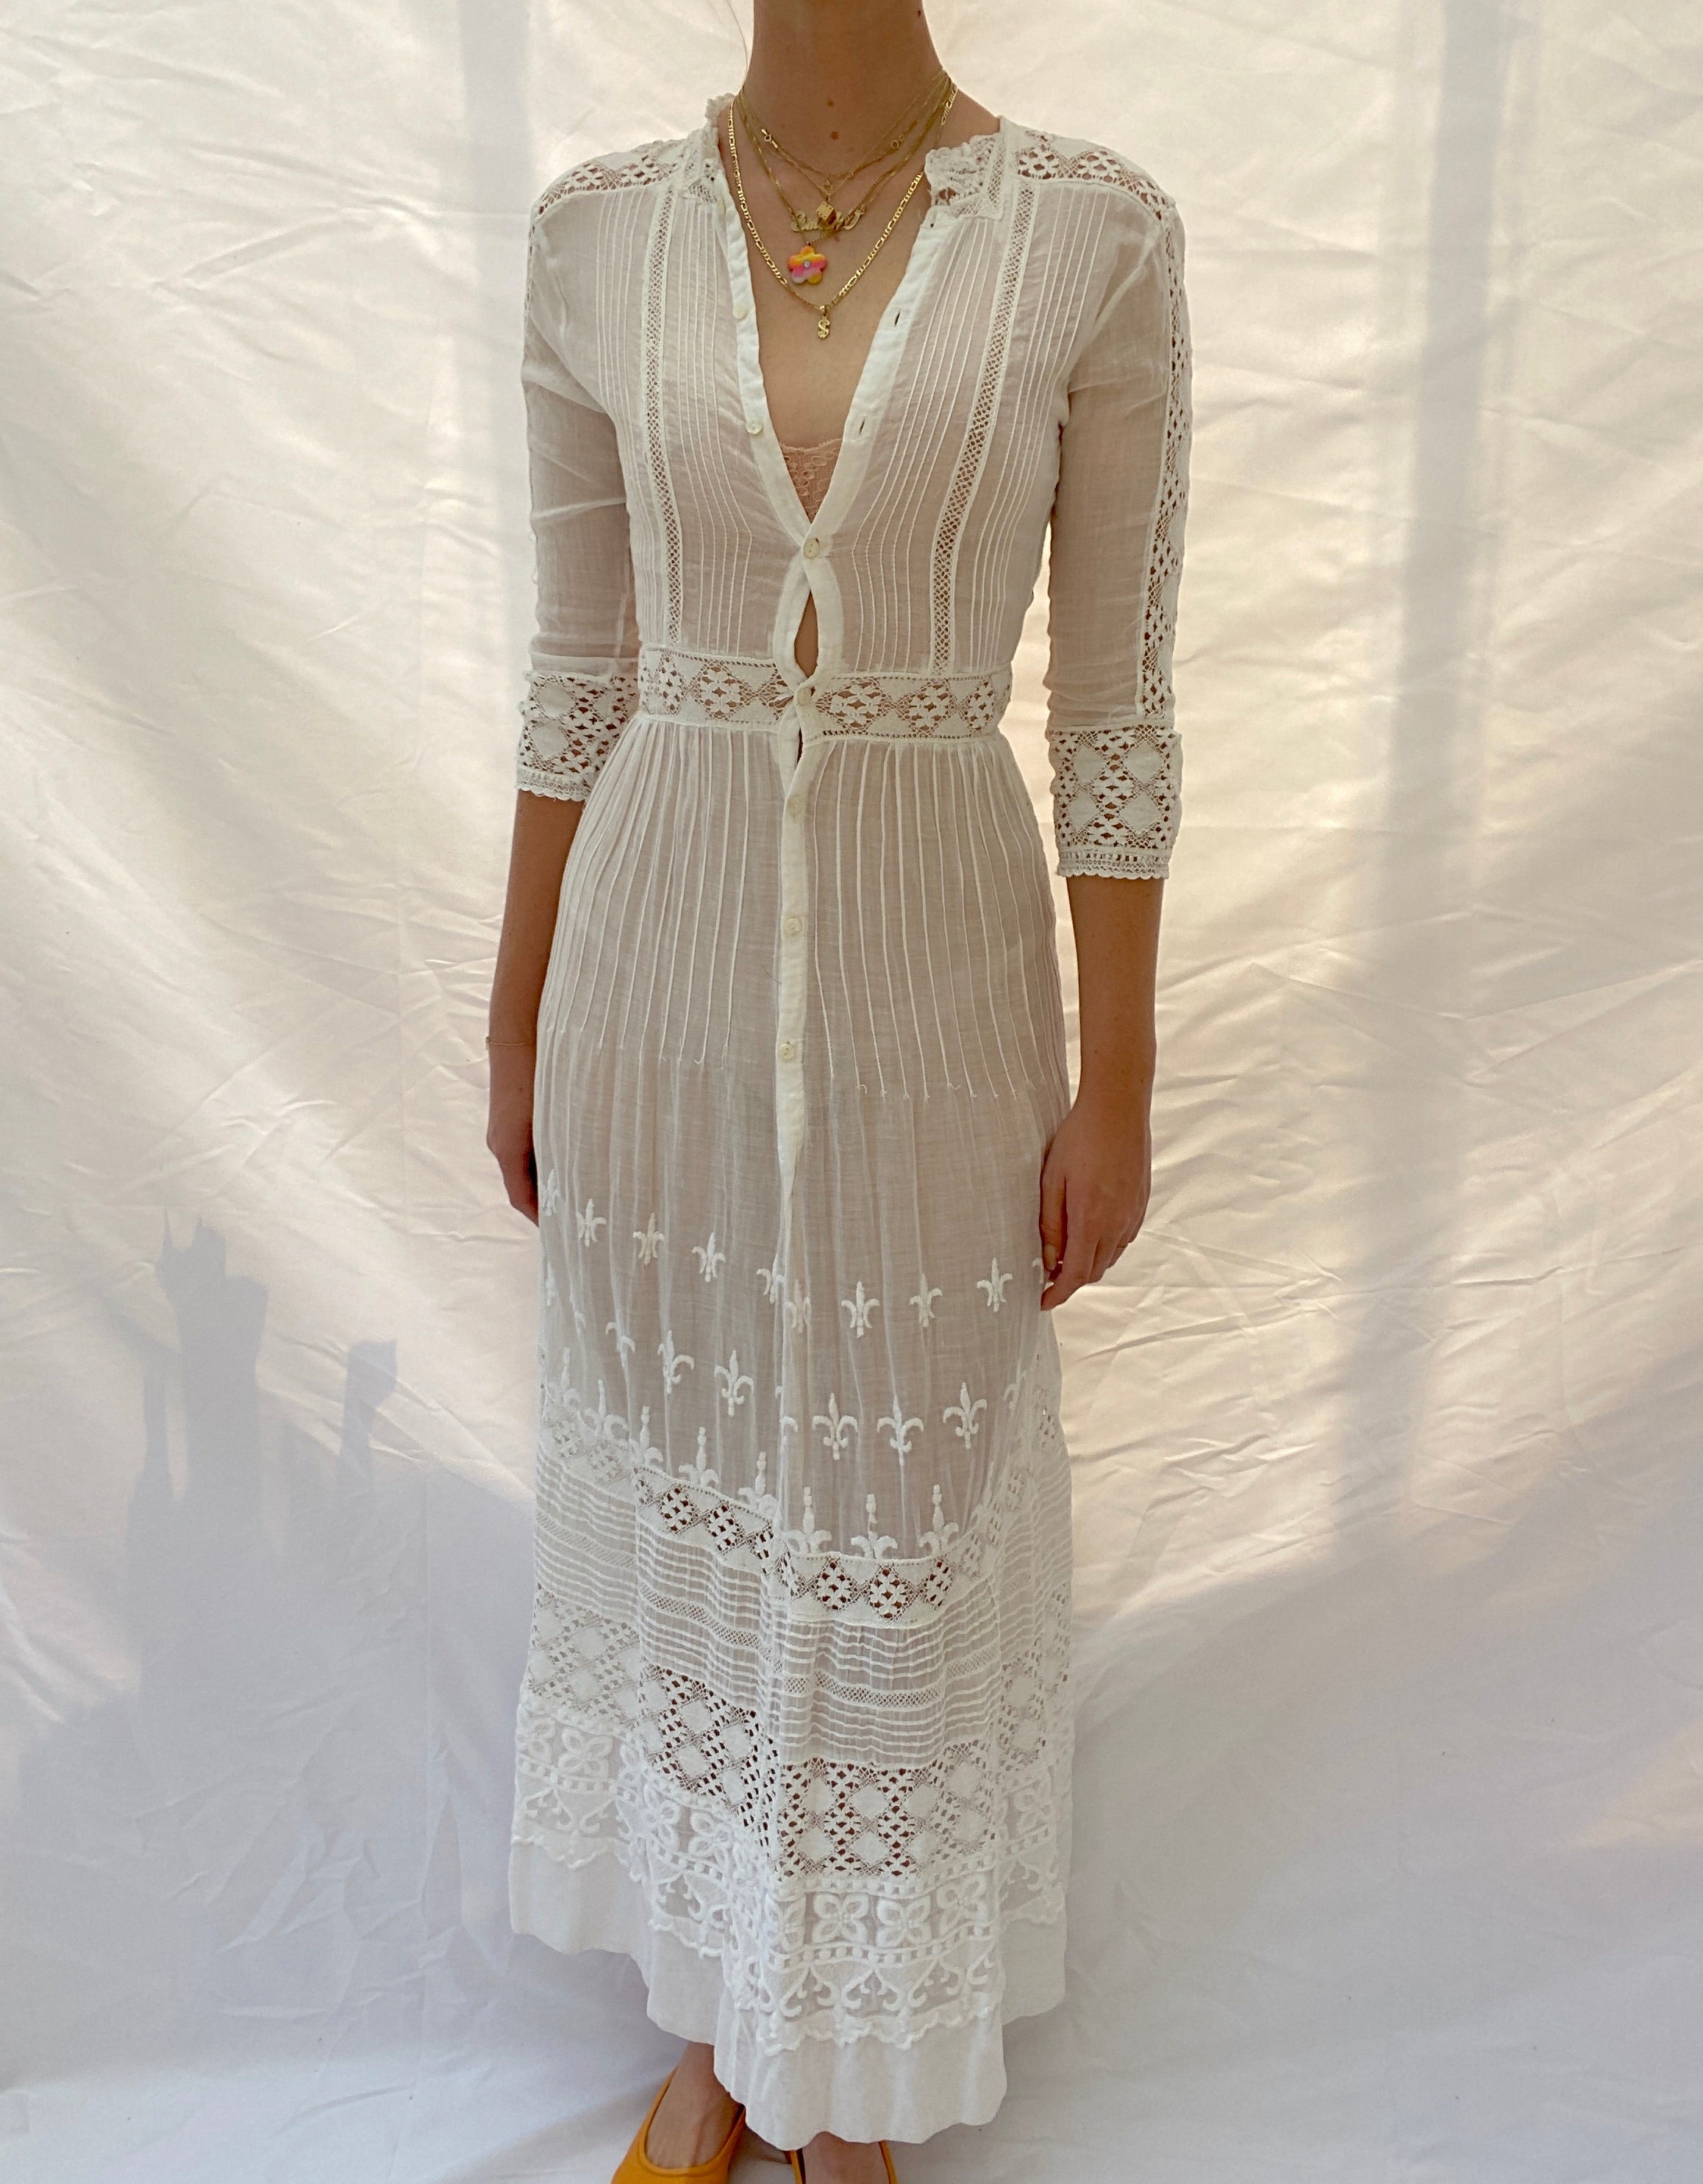 White Victorian Cotton Dress With Embroidery